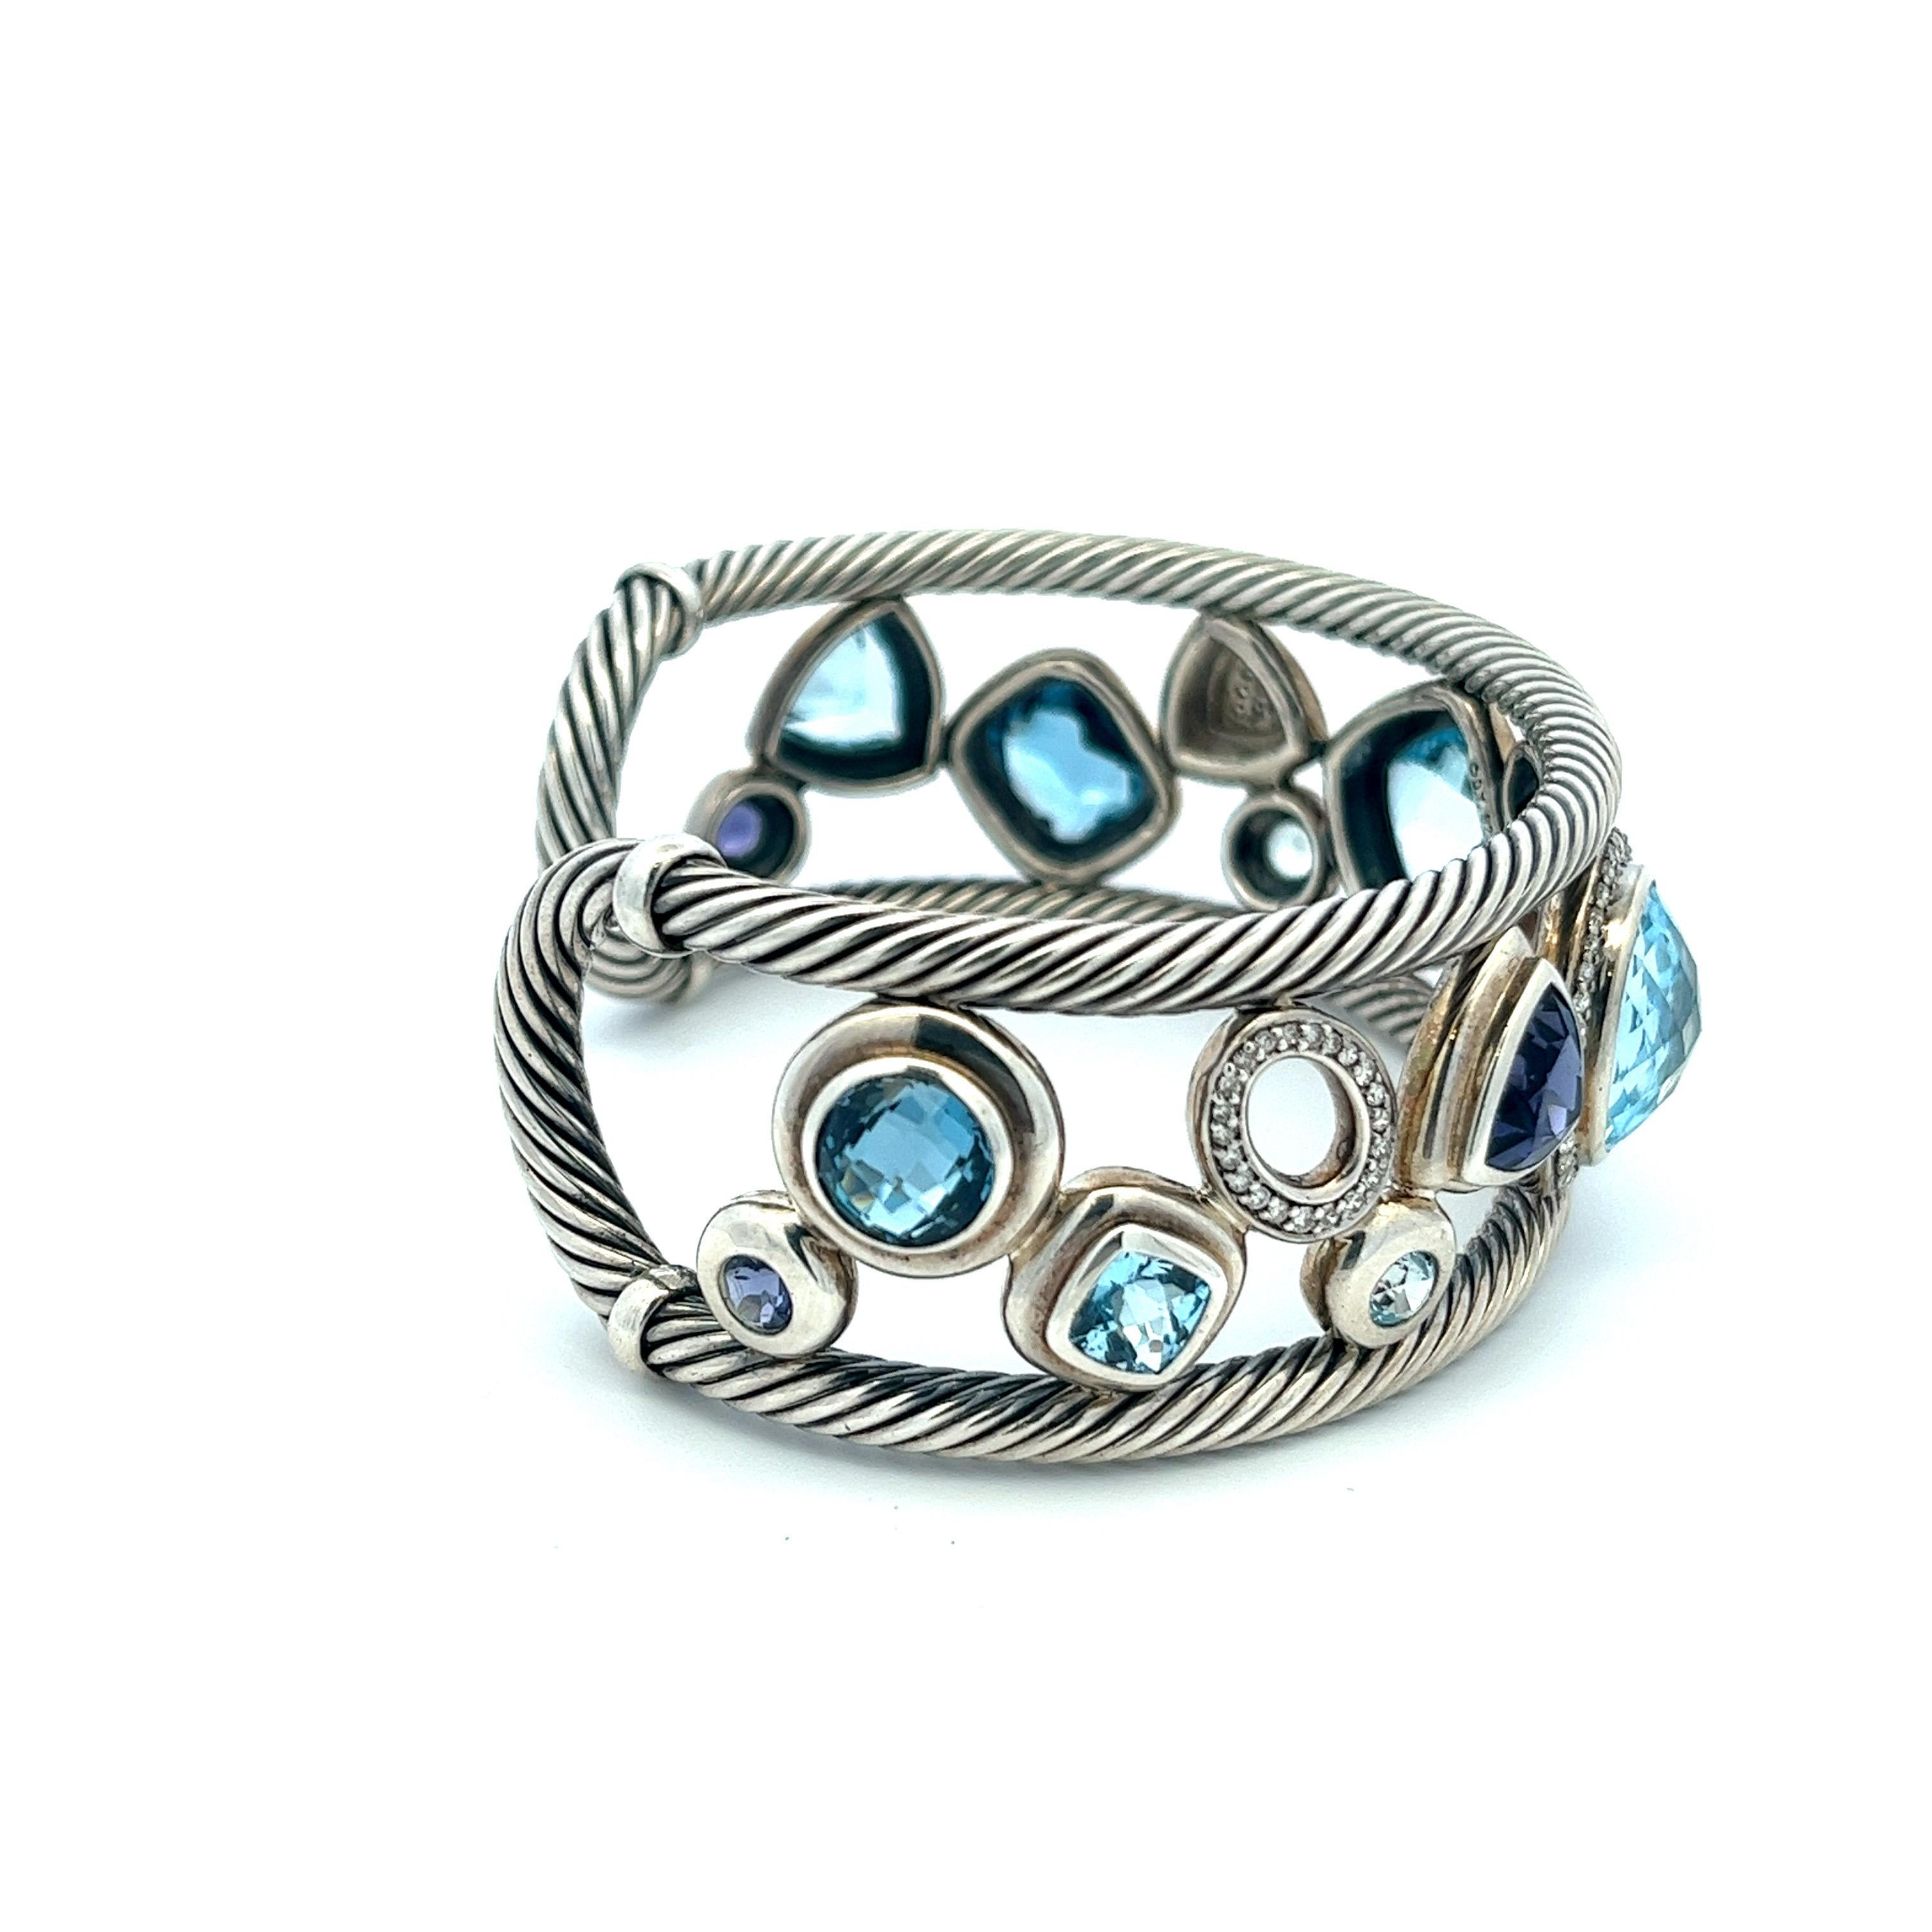 Modernist David Yurman Blue Oval Mosaic Cuff Bracelet in Sterling Silver 925 In Excellent Condition In Fairfield, CT